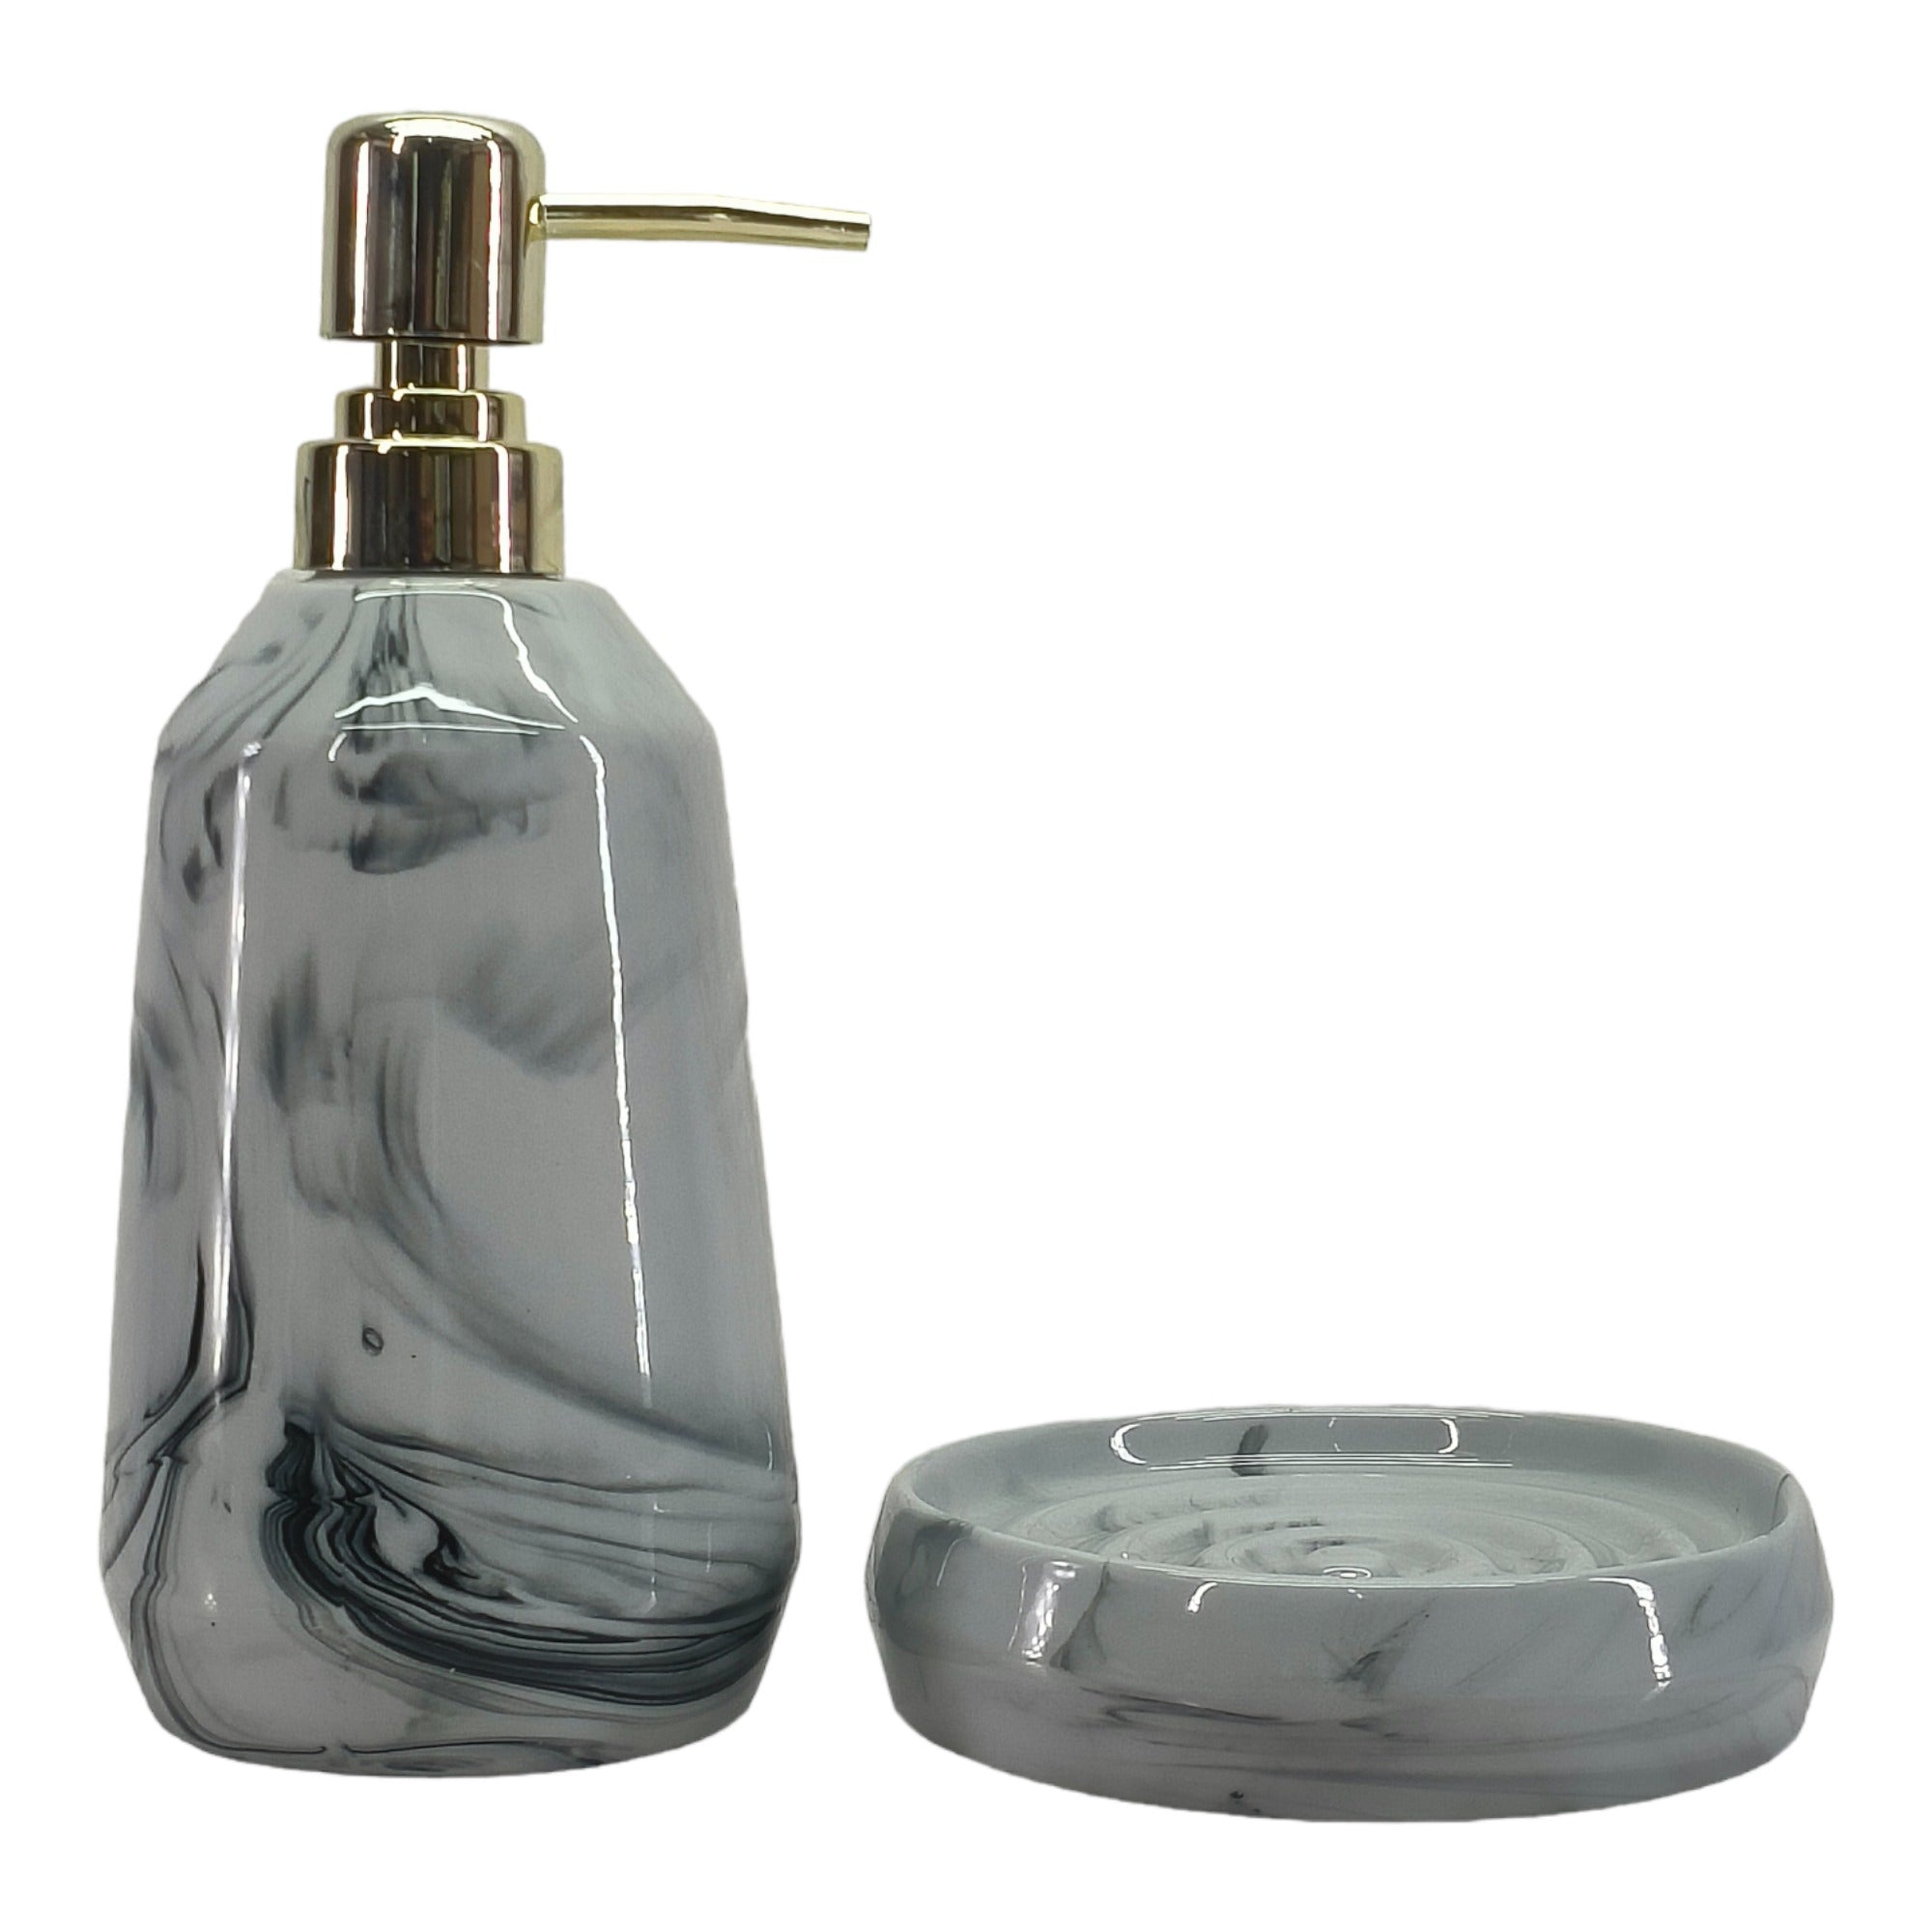 Ceramic Soap Dispenser Set with Soap Dish, Set of 2 Bathroom Accessories for Home (C2110)